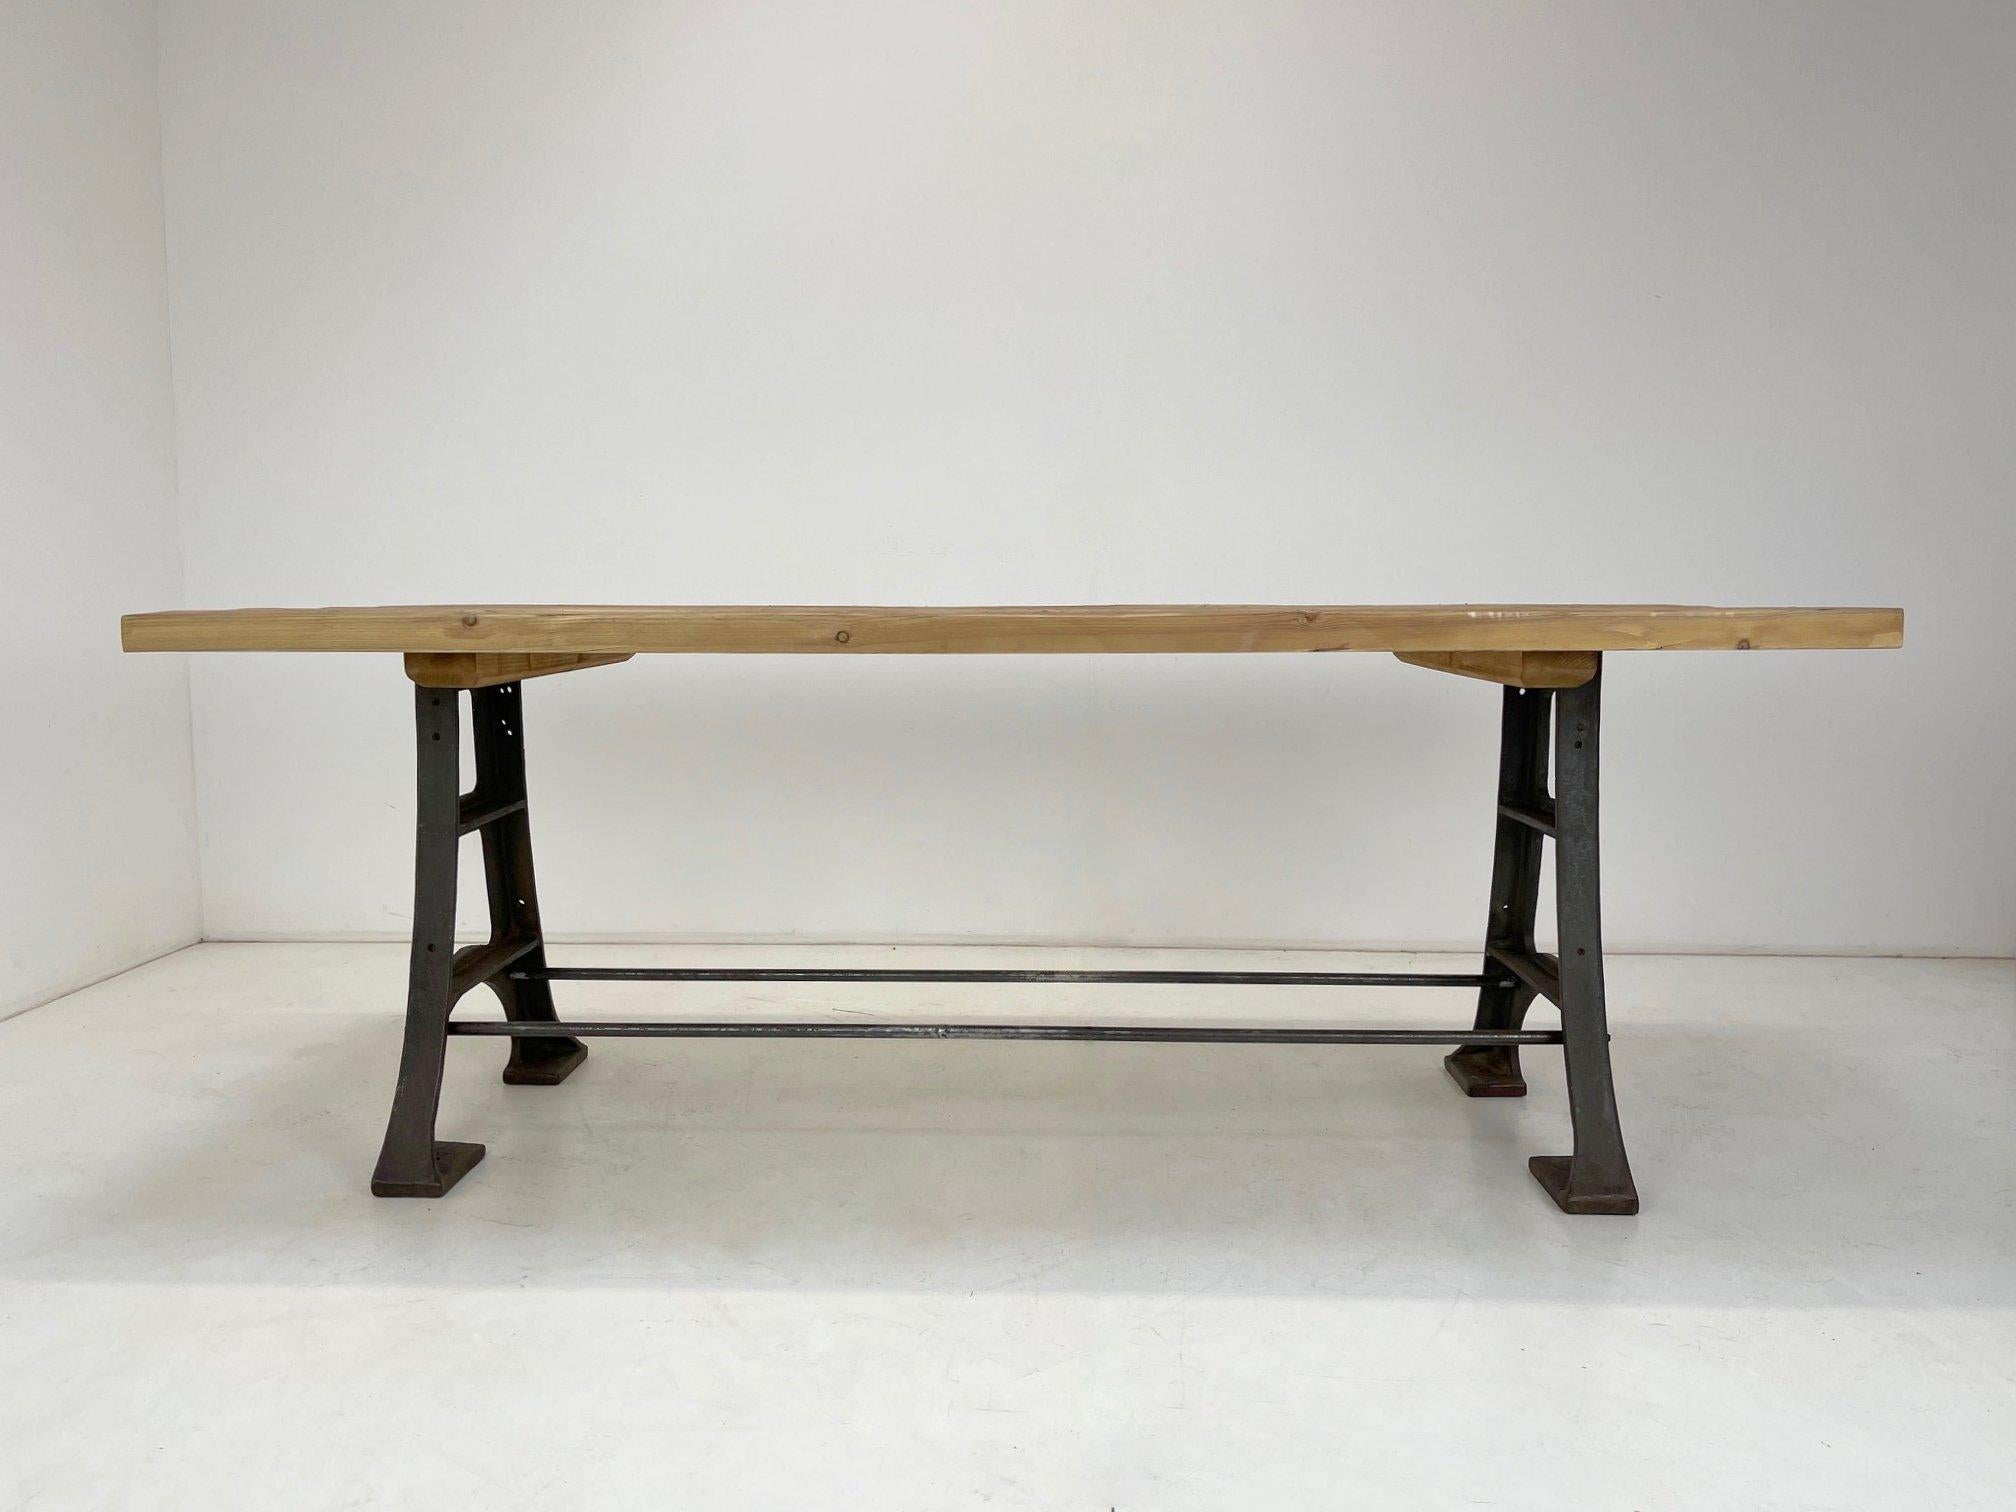 A unique table made from an original vintage factory table with a new solid recycled wood top will give any interior an original touch.